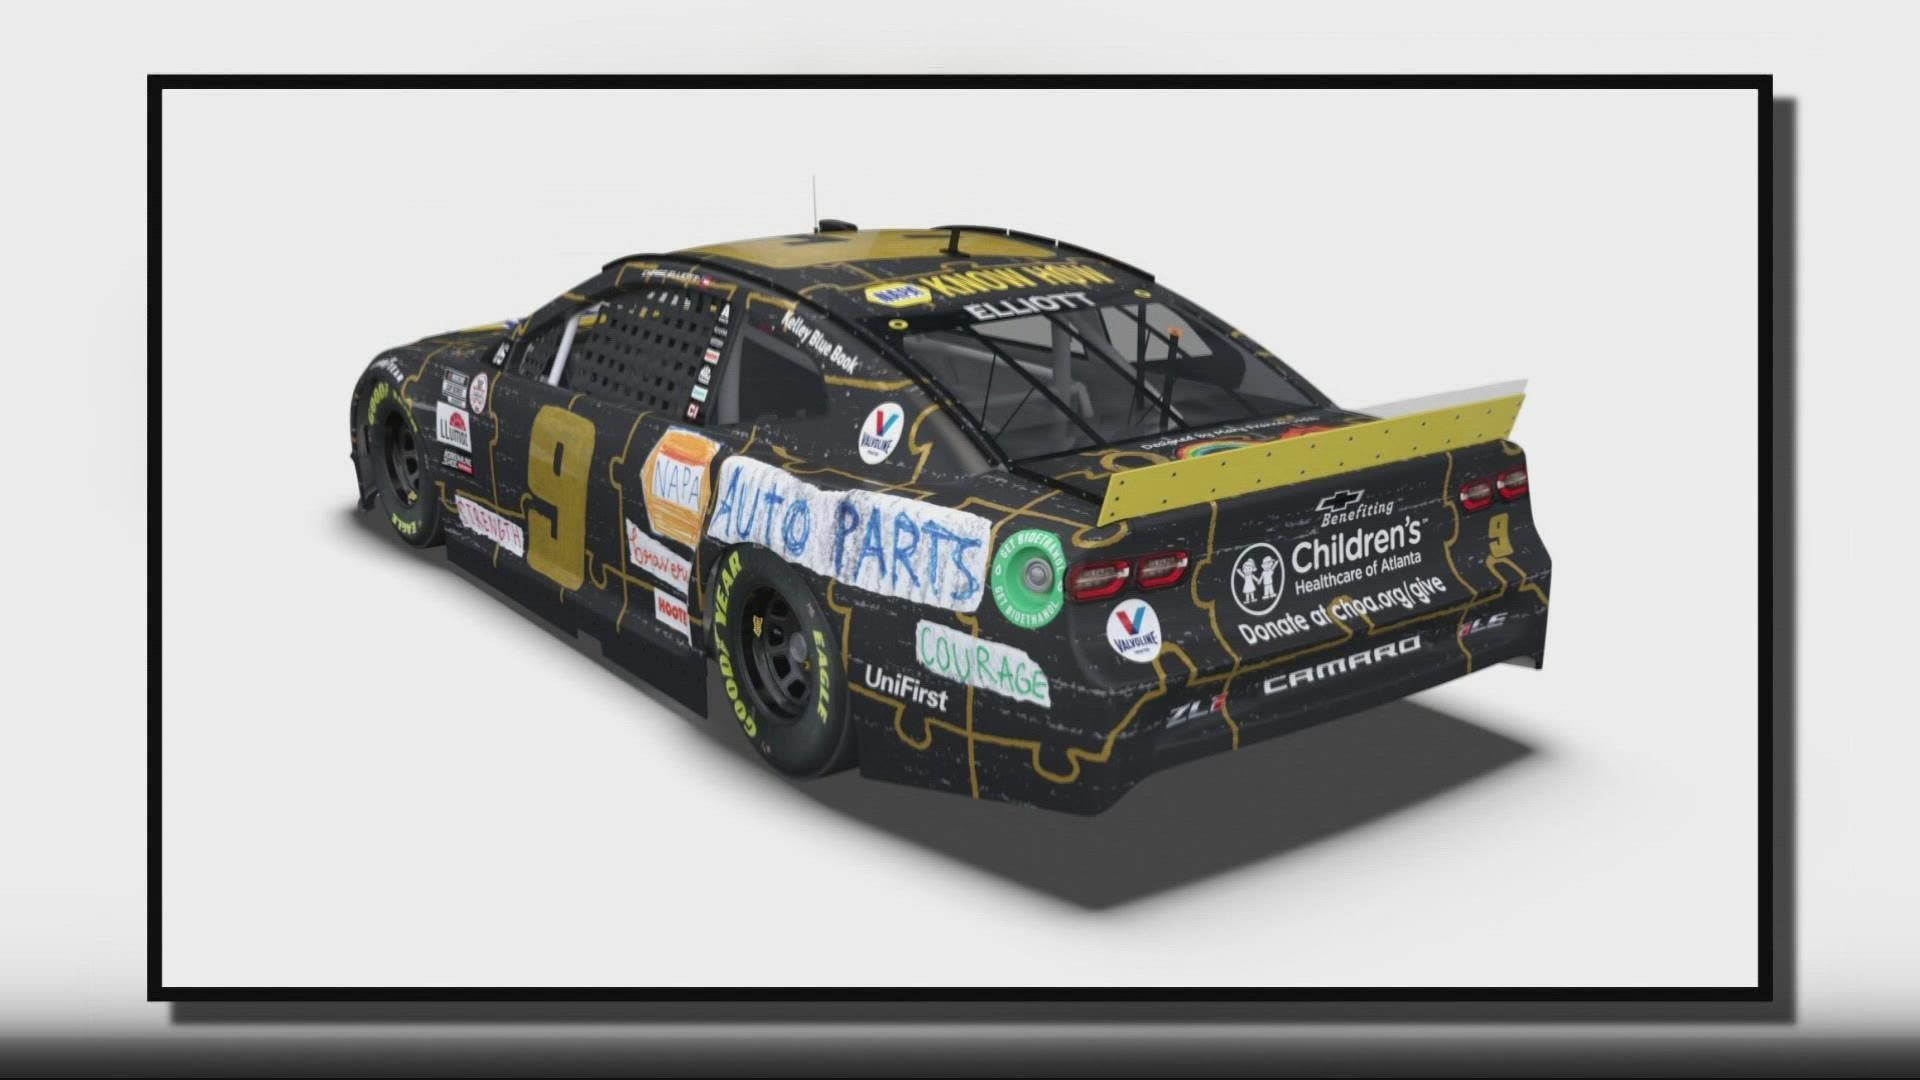 The paint scheme will debut at Darlington in the first round of the playoffs.